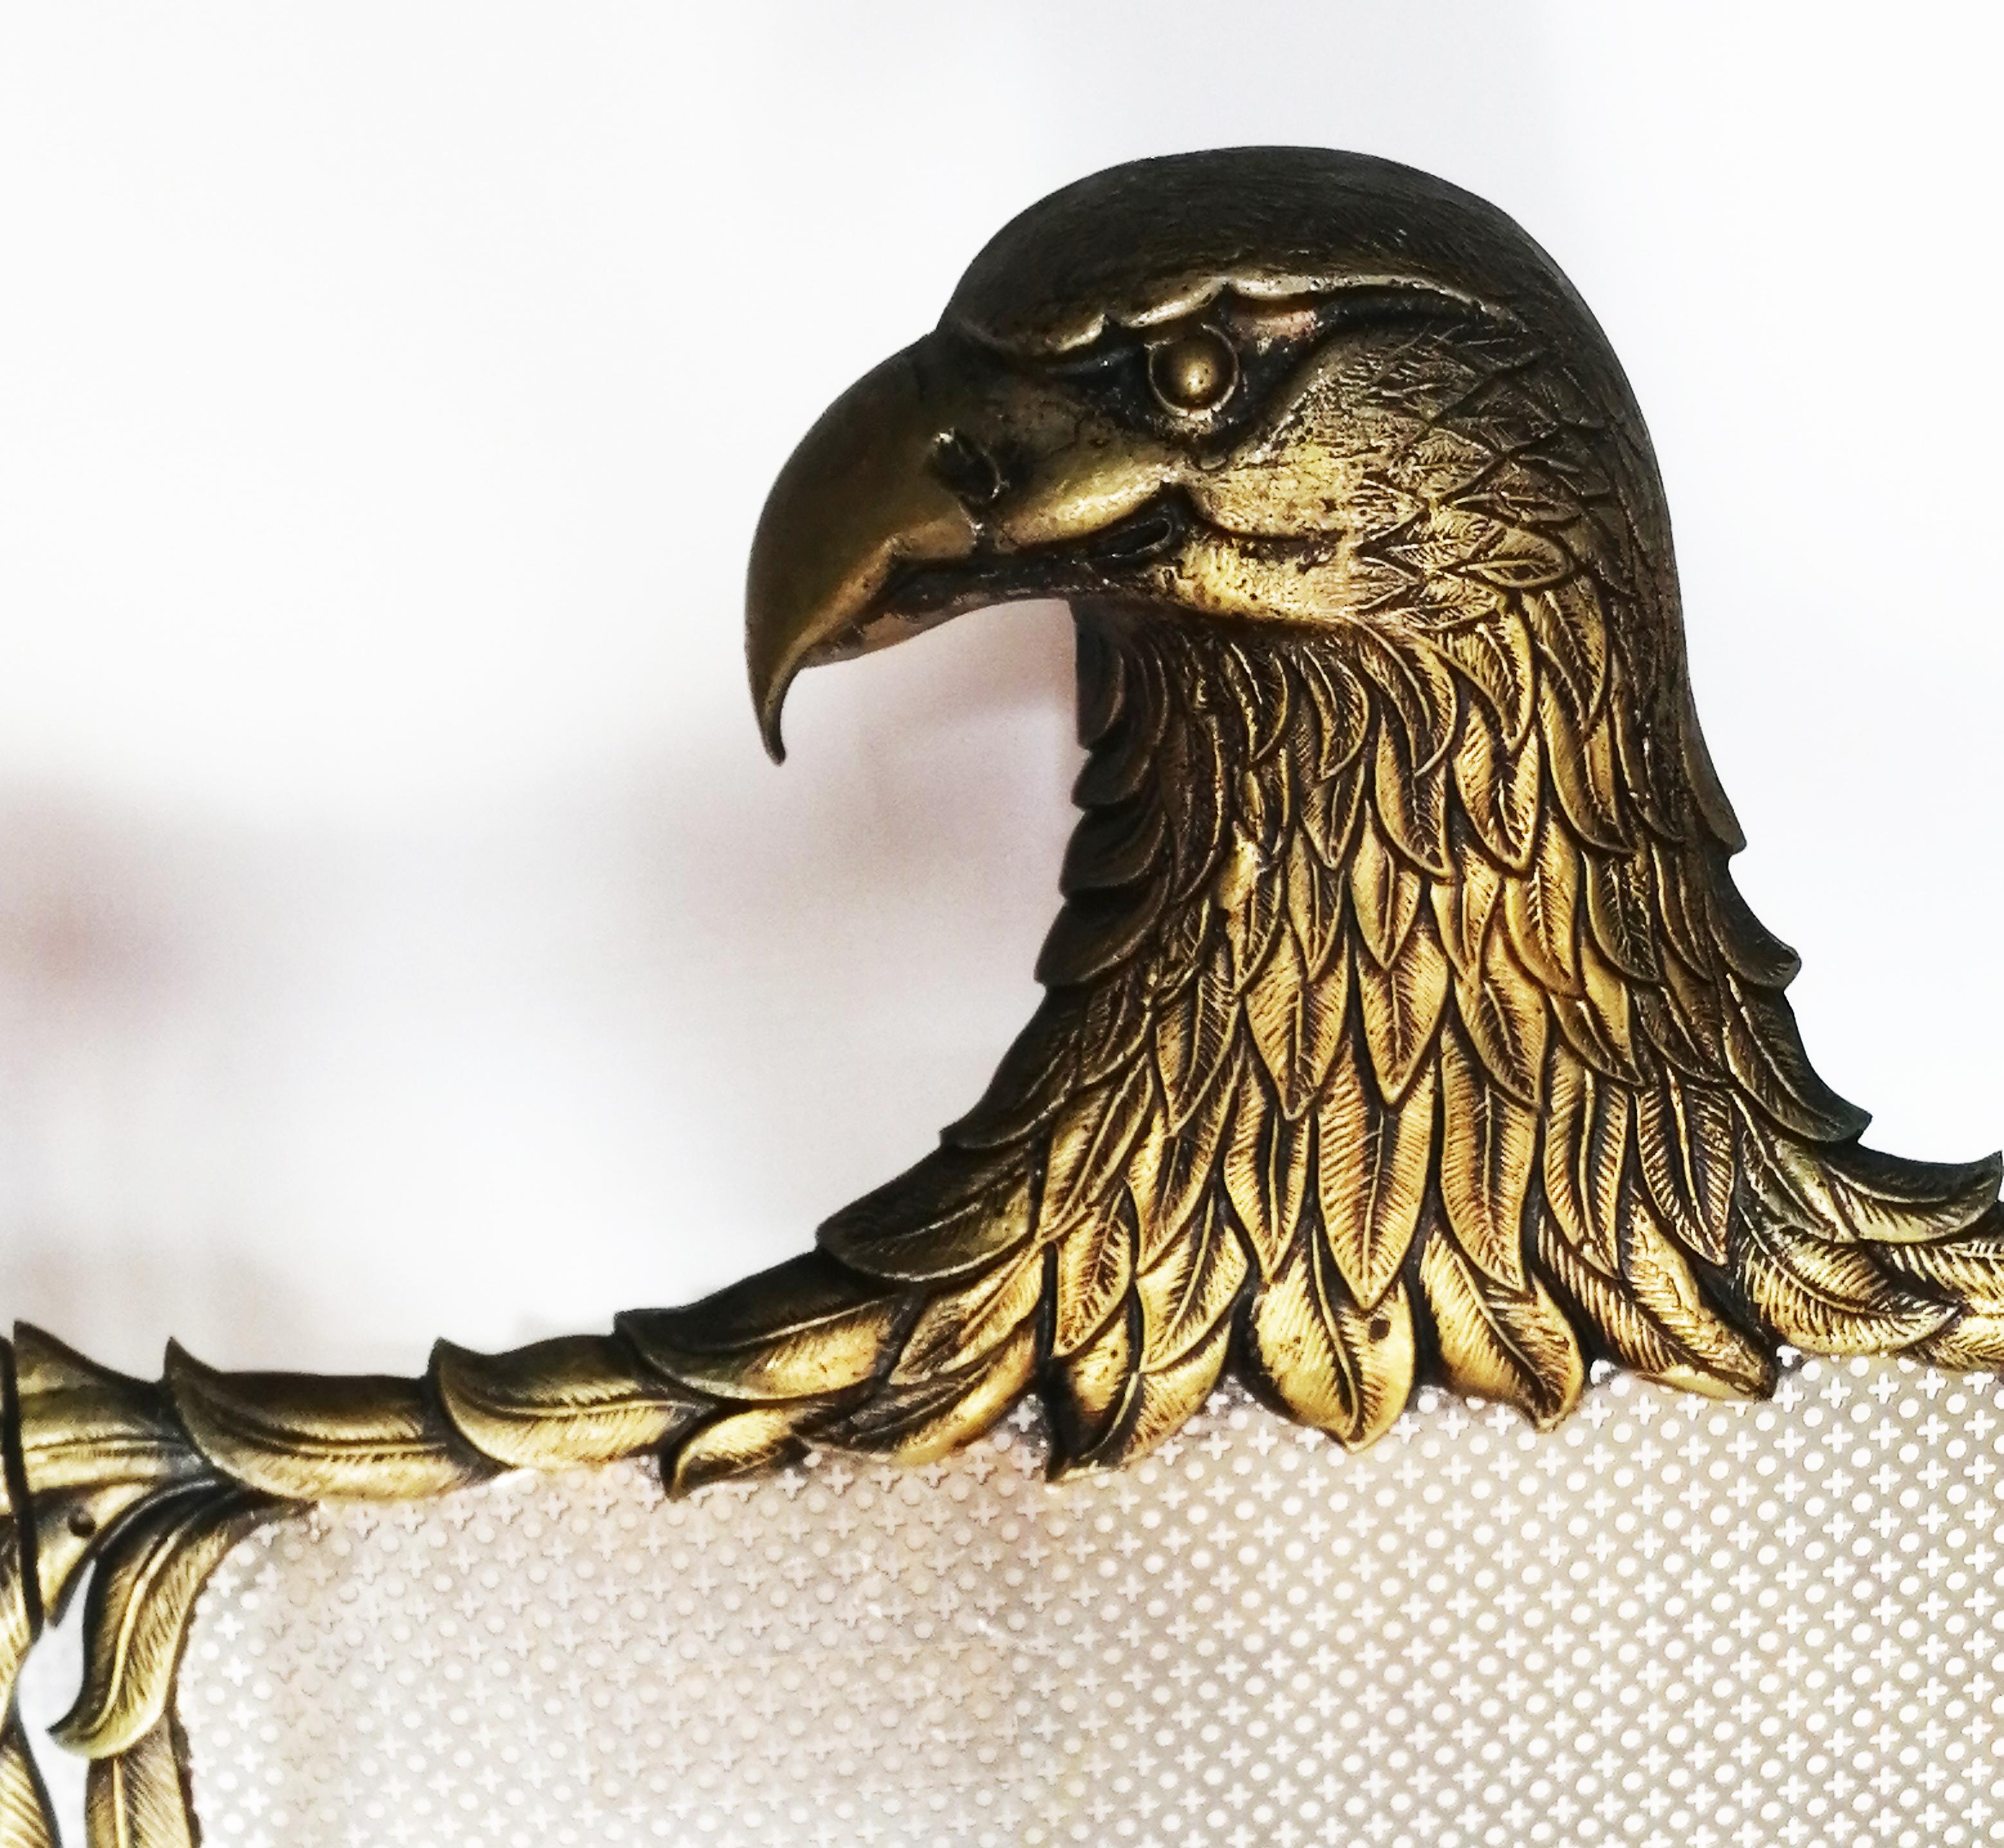 Spanish Fire Screen Bronze or Brass Eagle-Shaped Sparks, Spain, 20th Century